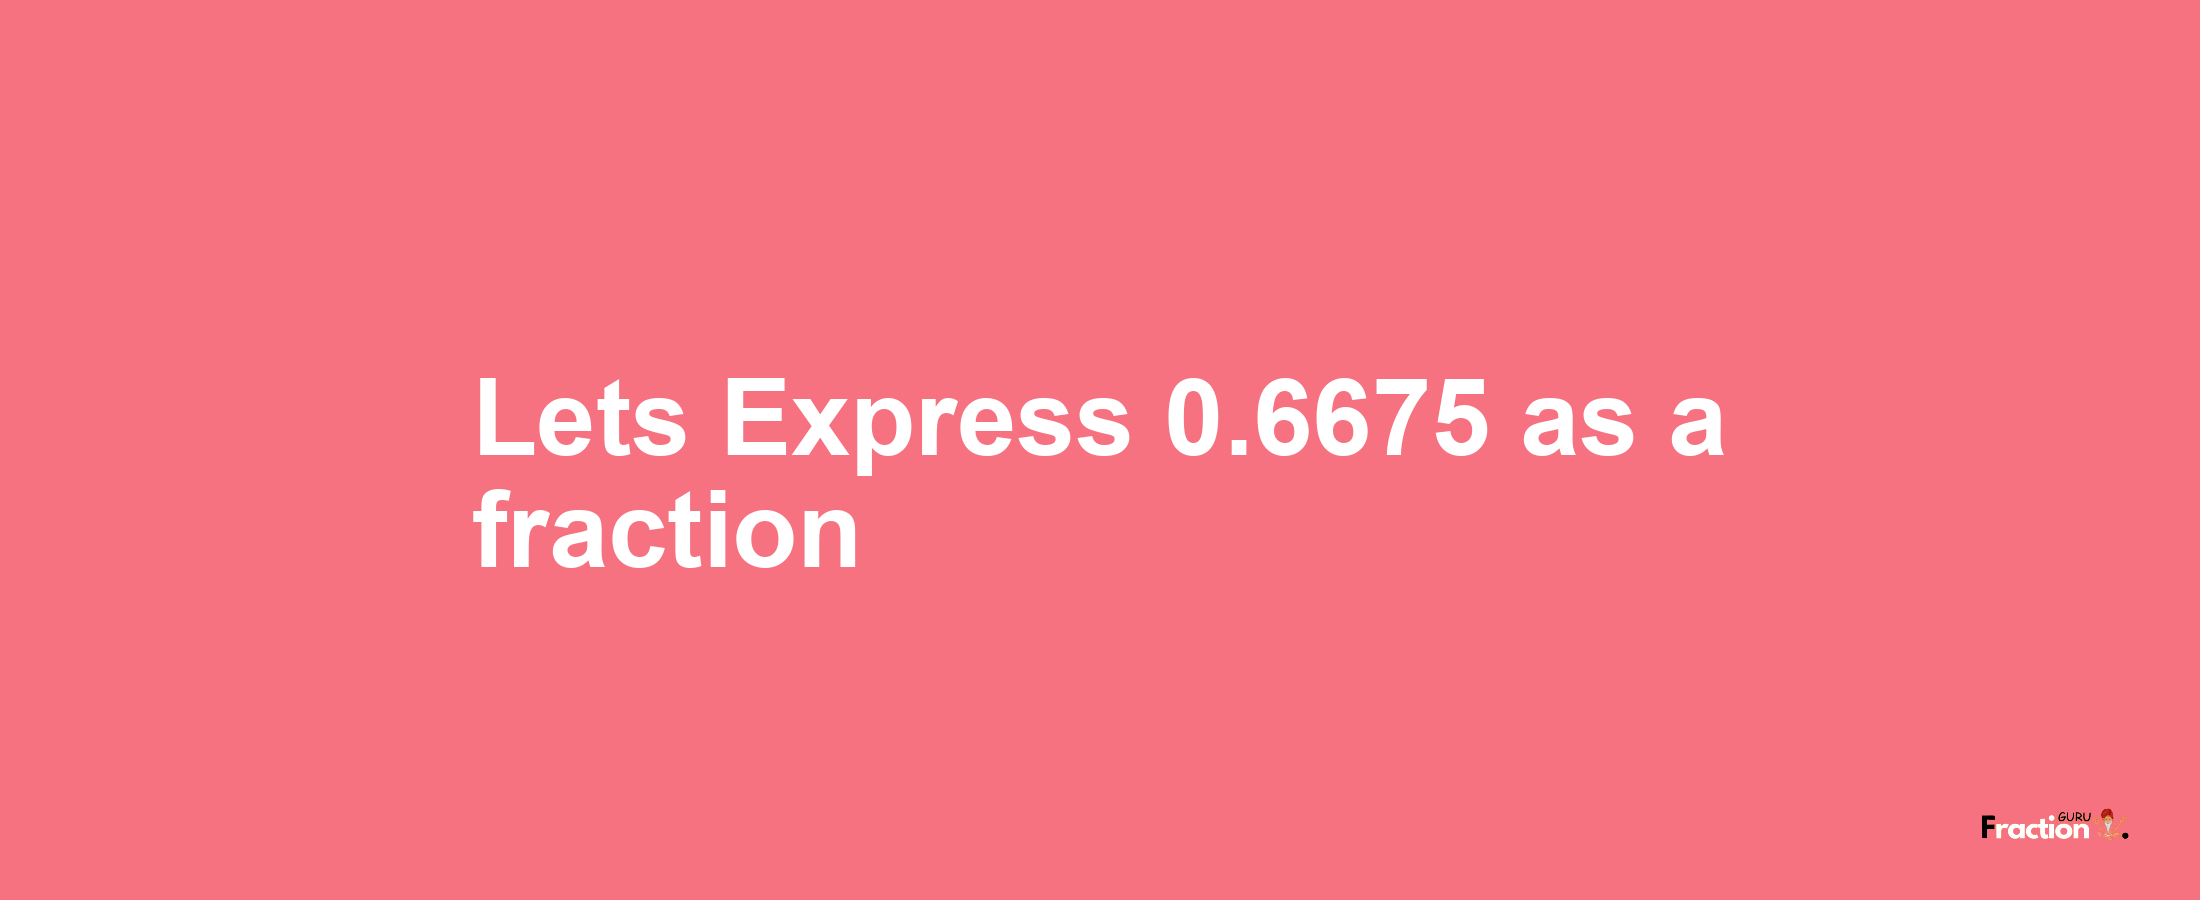 Lets Express 0.6675 as afraction